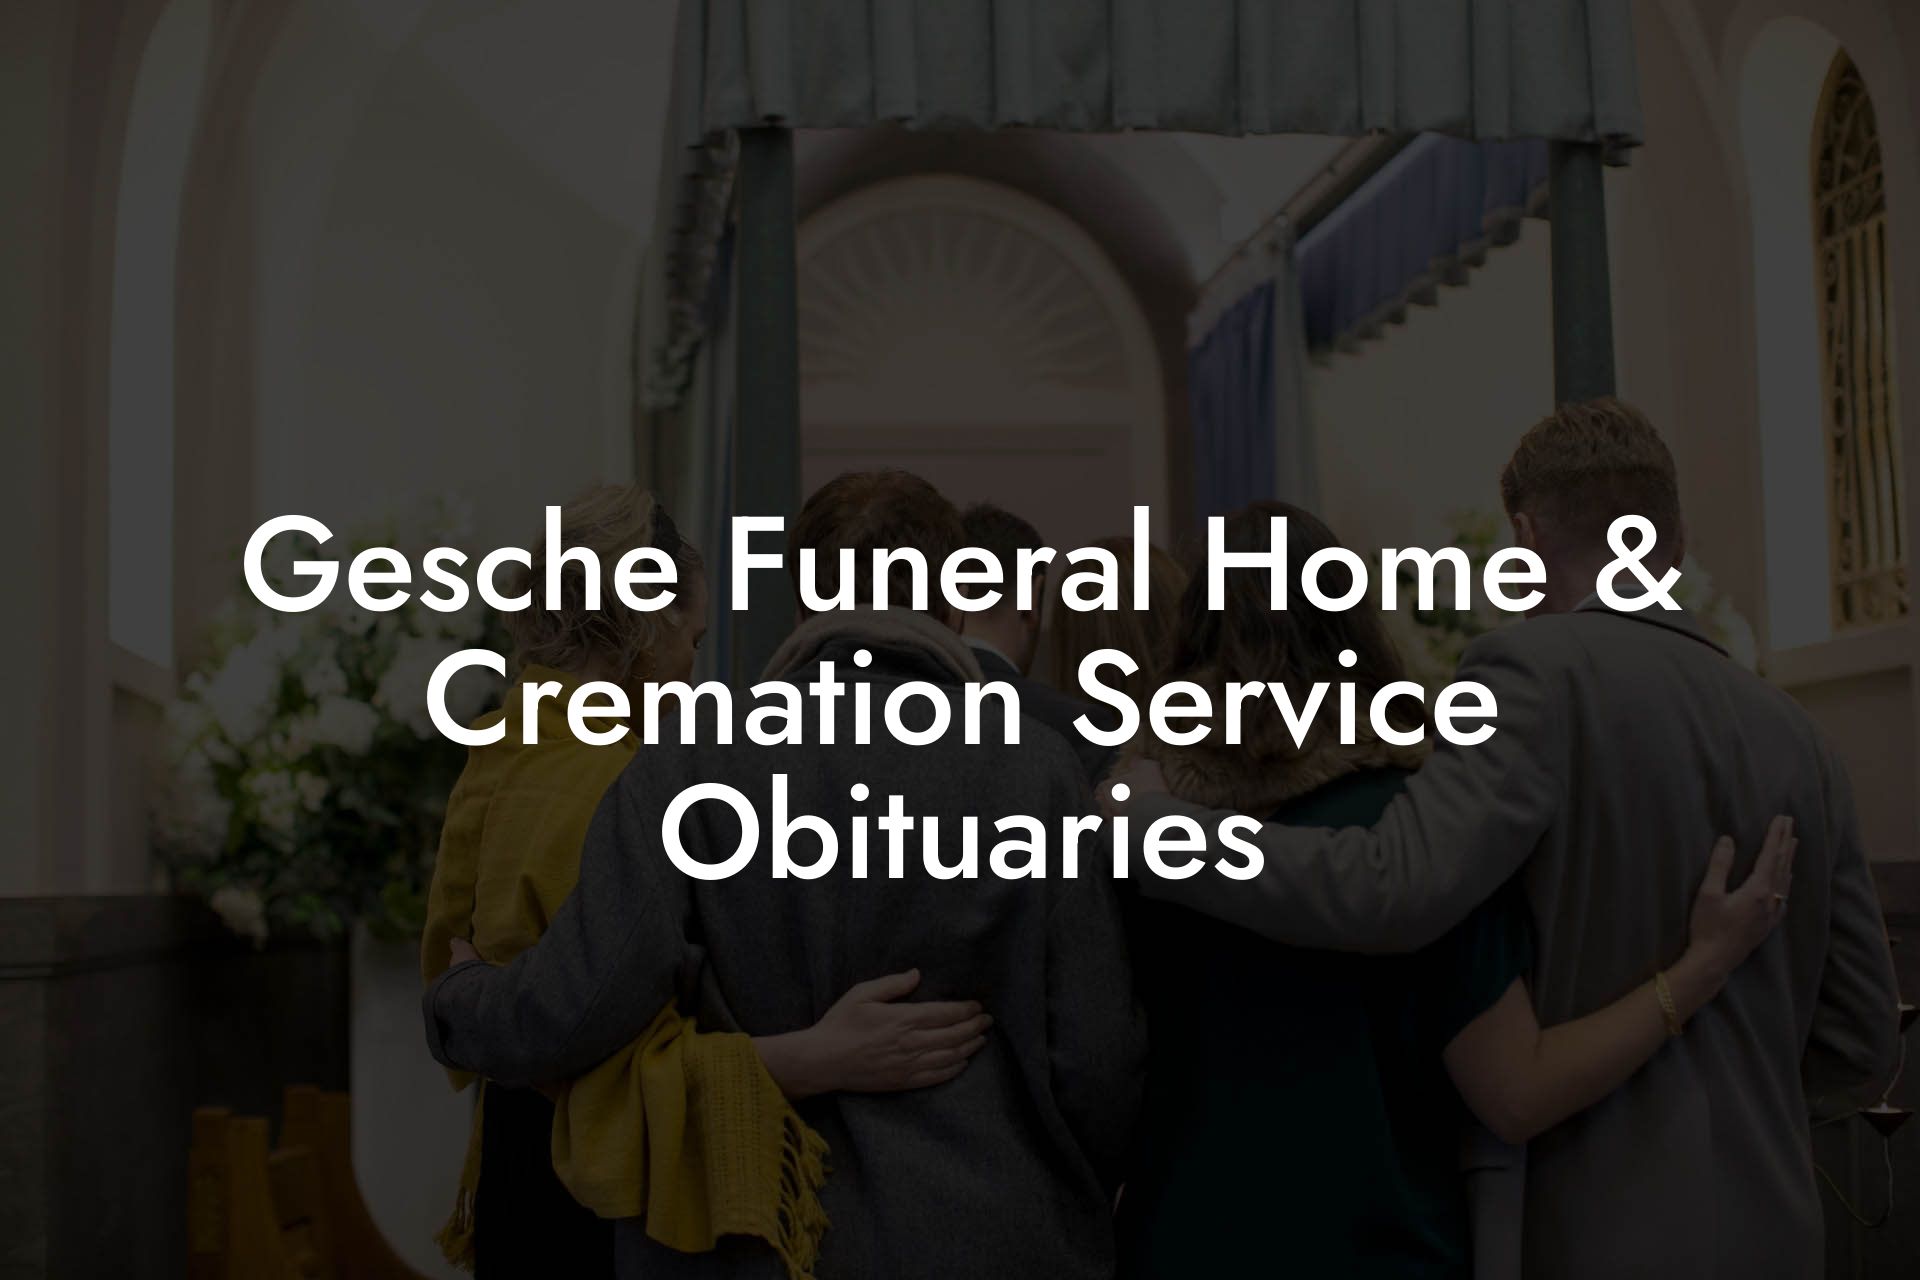 Gesche Funeral Home & Cremation Service Obituaries Eulogy Assistant